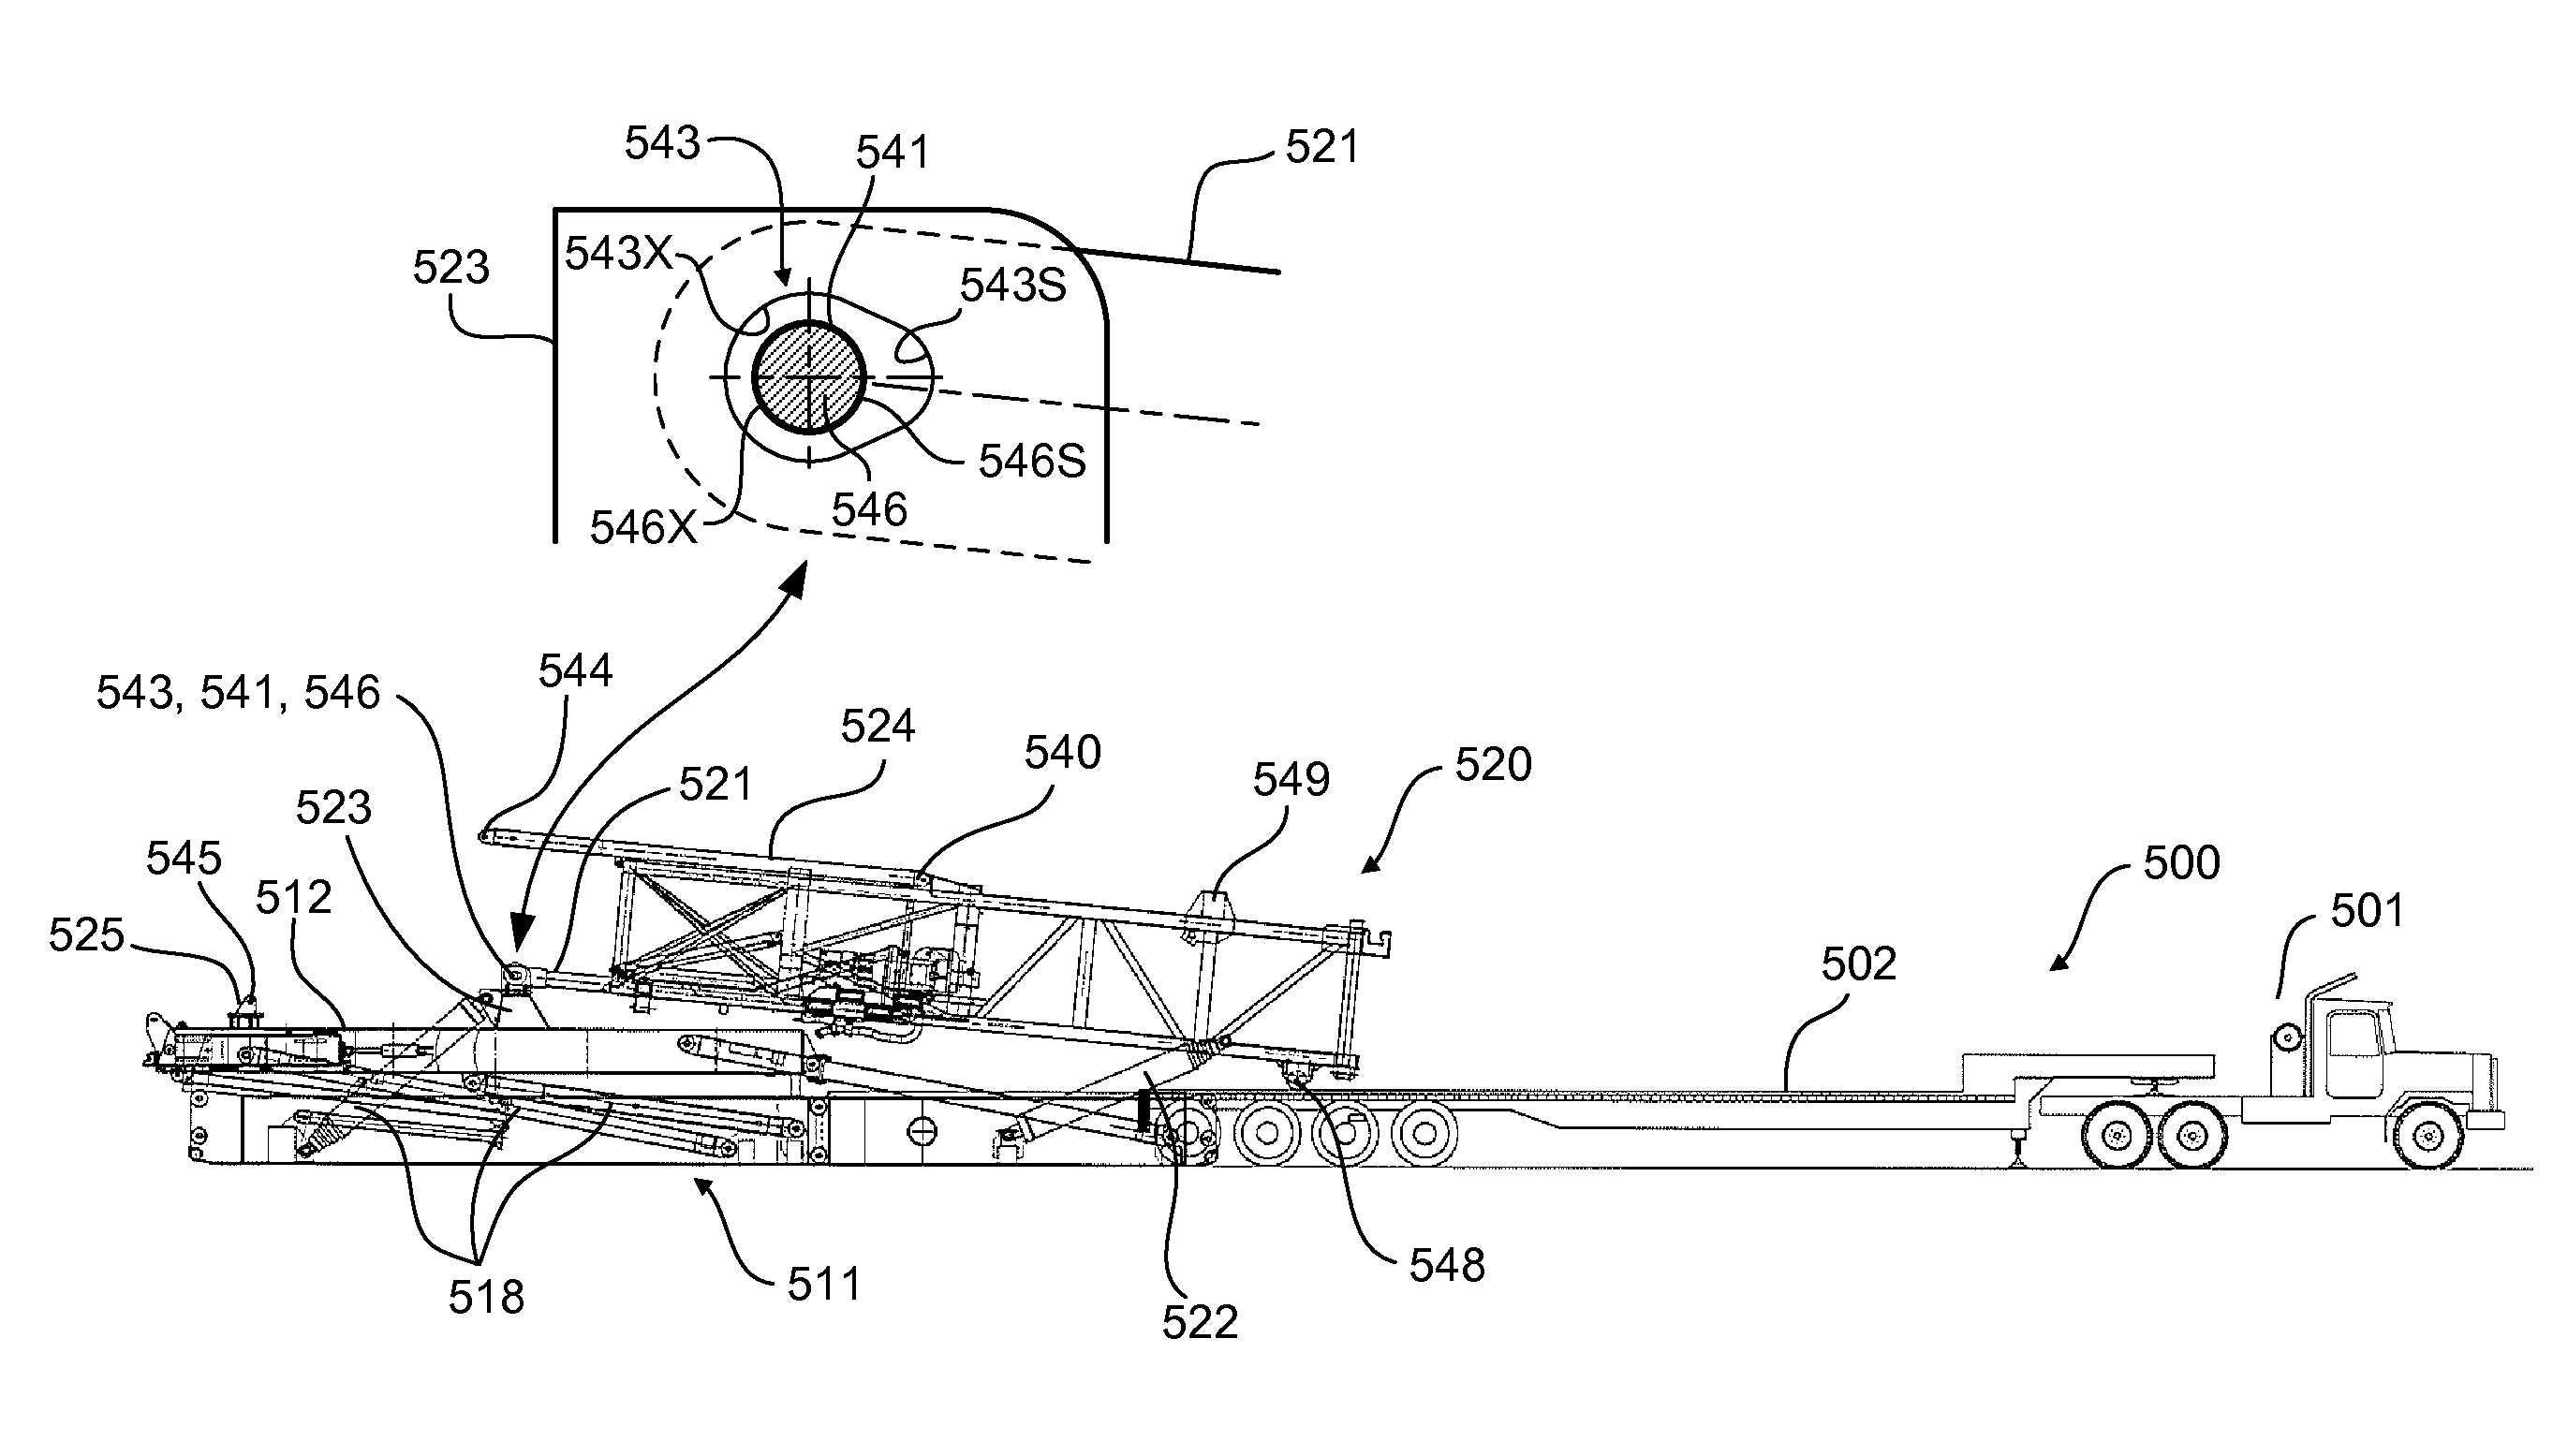 Pinned structural connection using a pin and plug arrangement